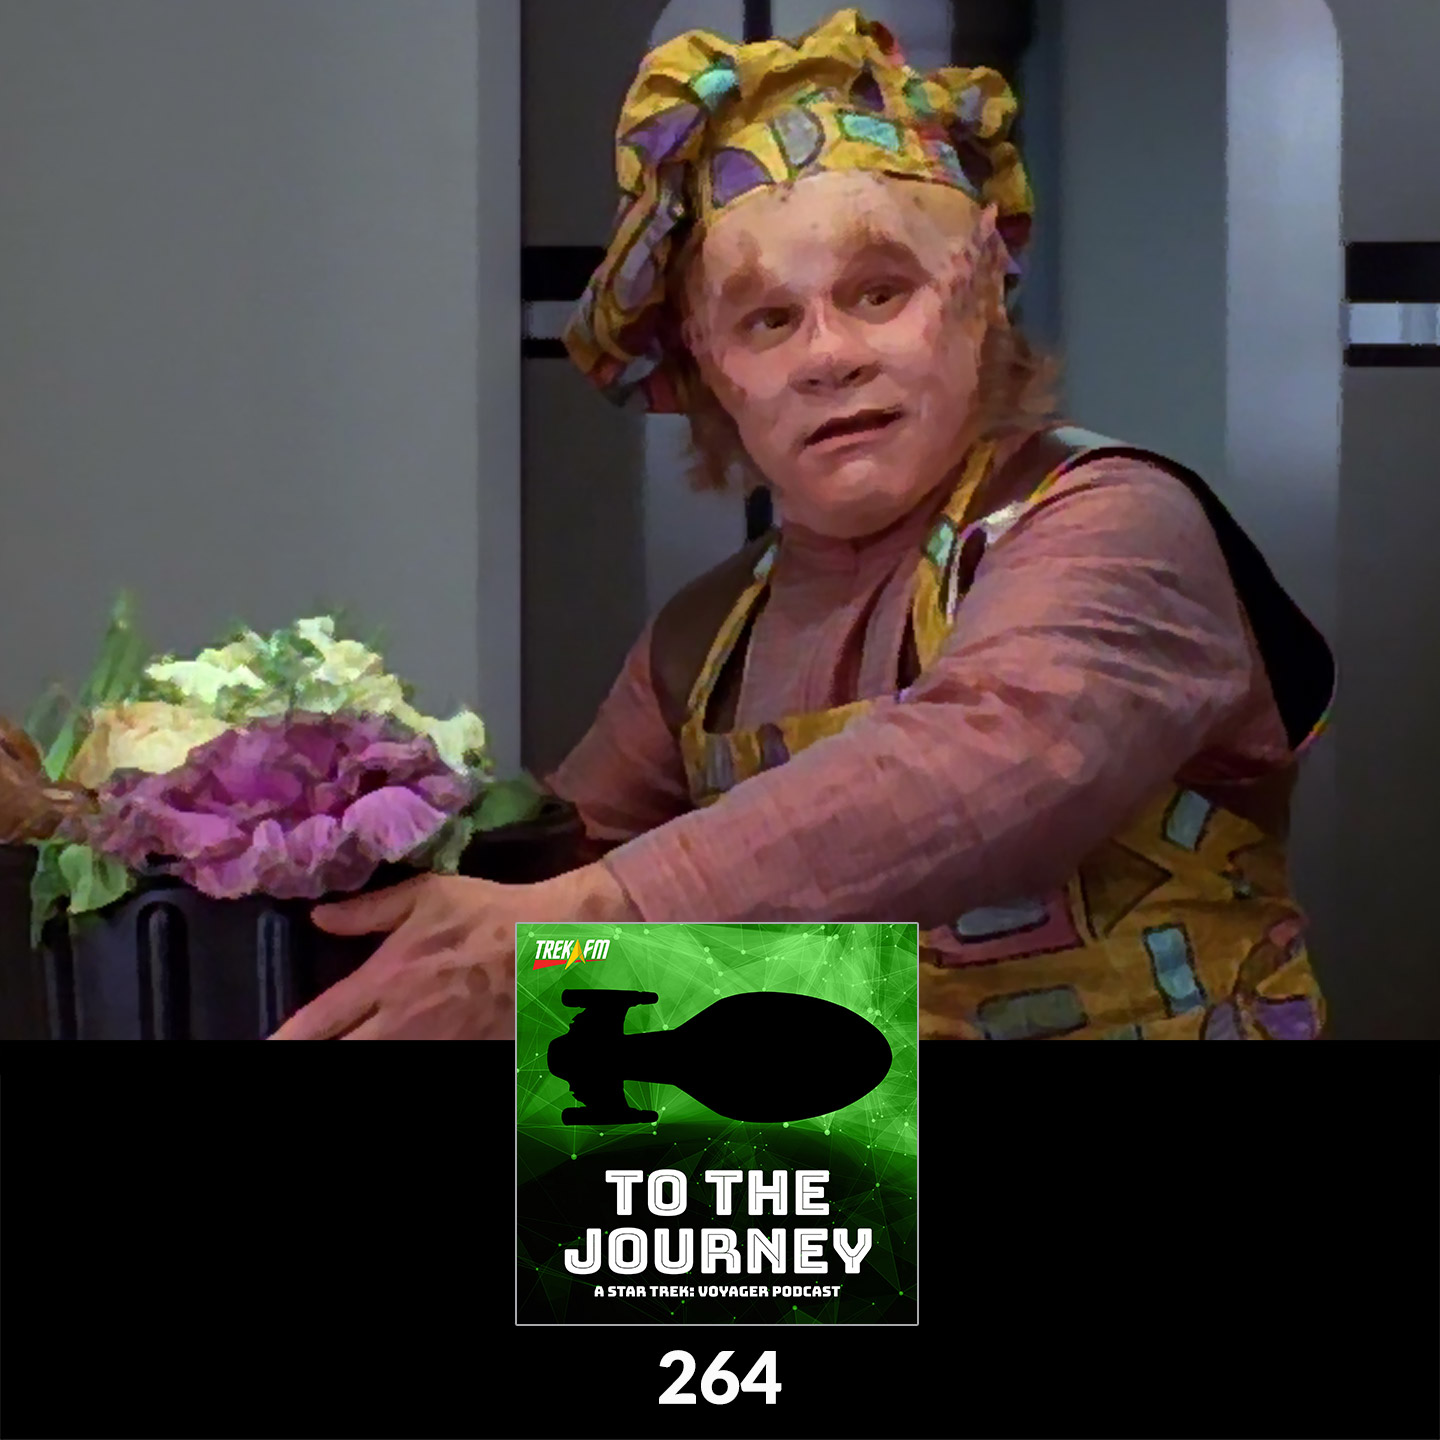 To The Journey 264: Kale for Breakfast - "The Cloud" Commentary.